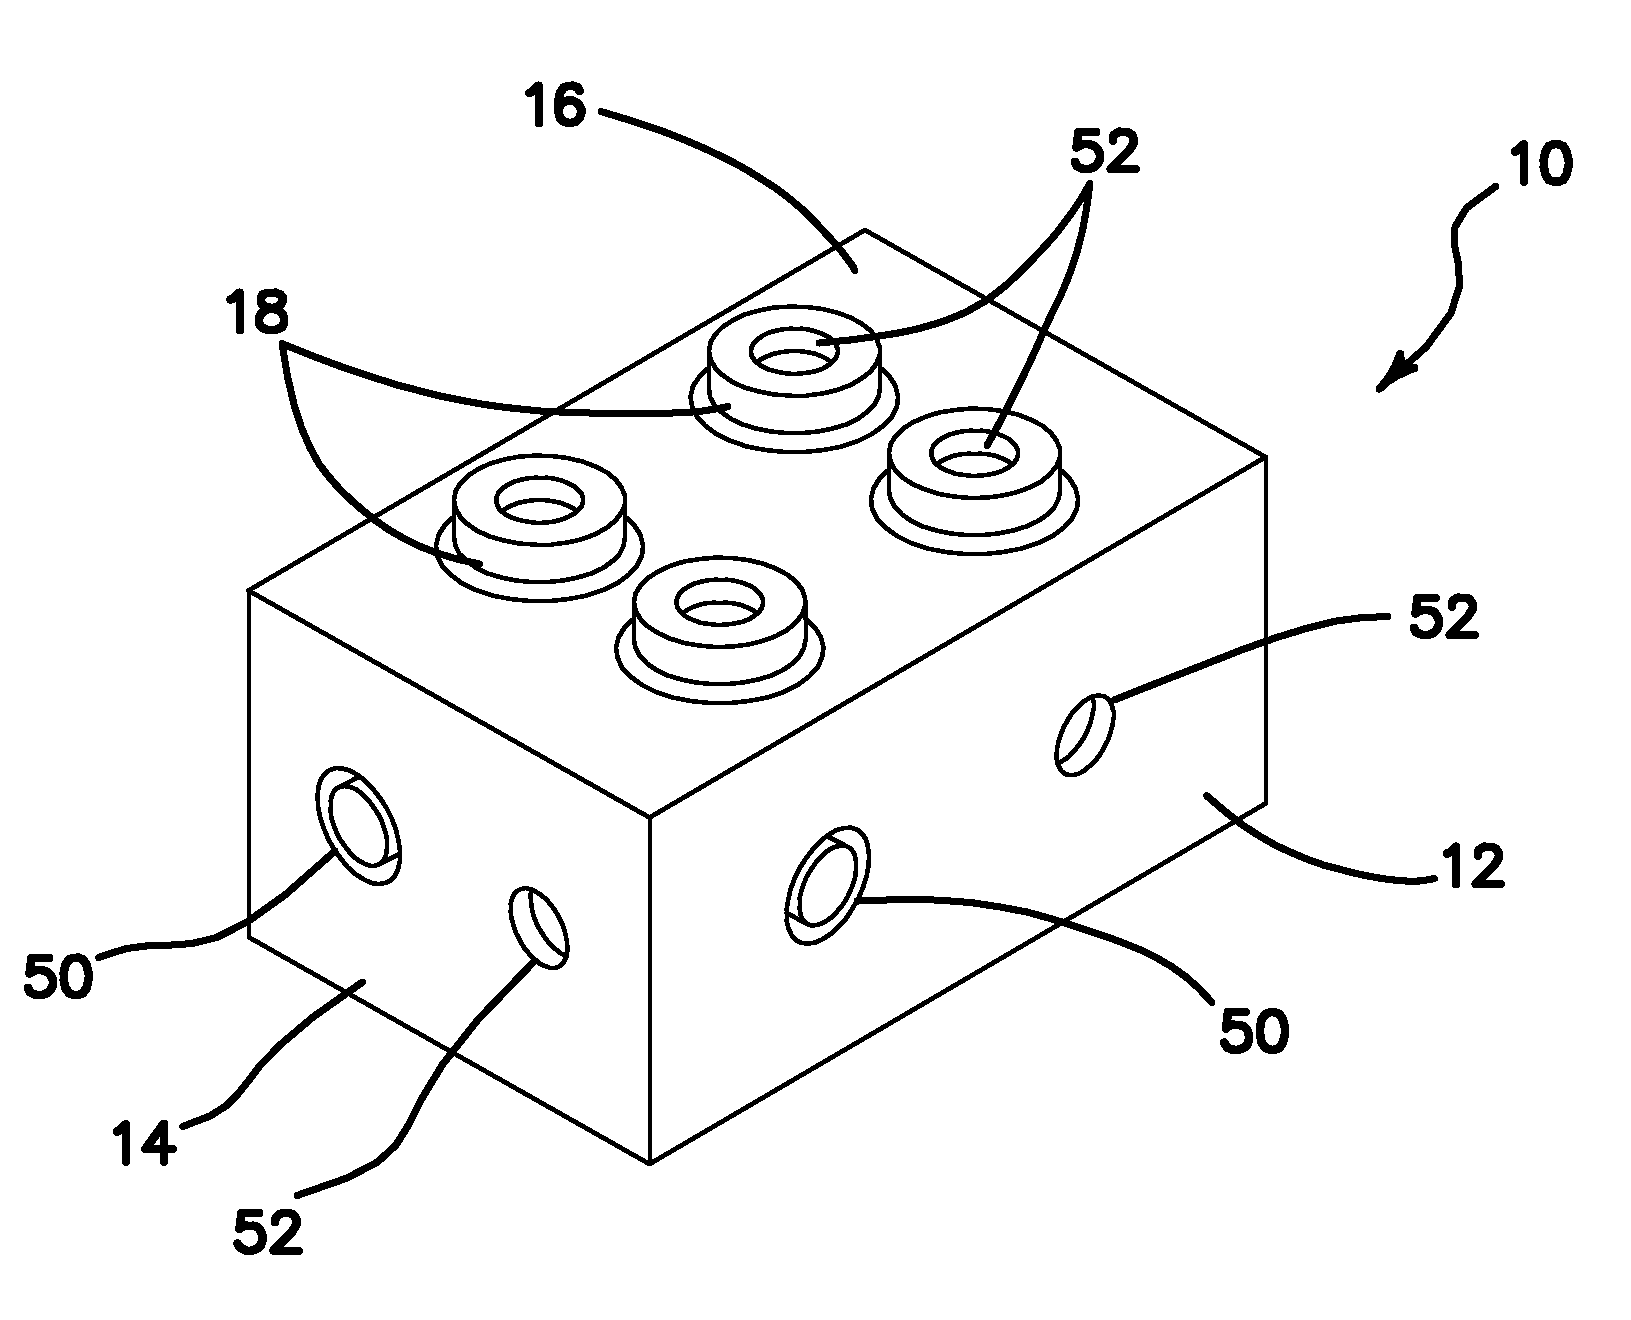 Apparatus and Method for Bonding Three Dimensional Construction Toys when Assembled